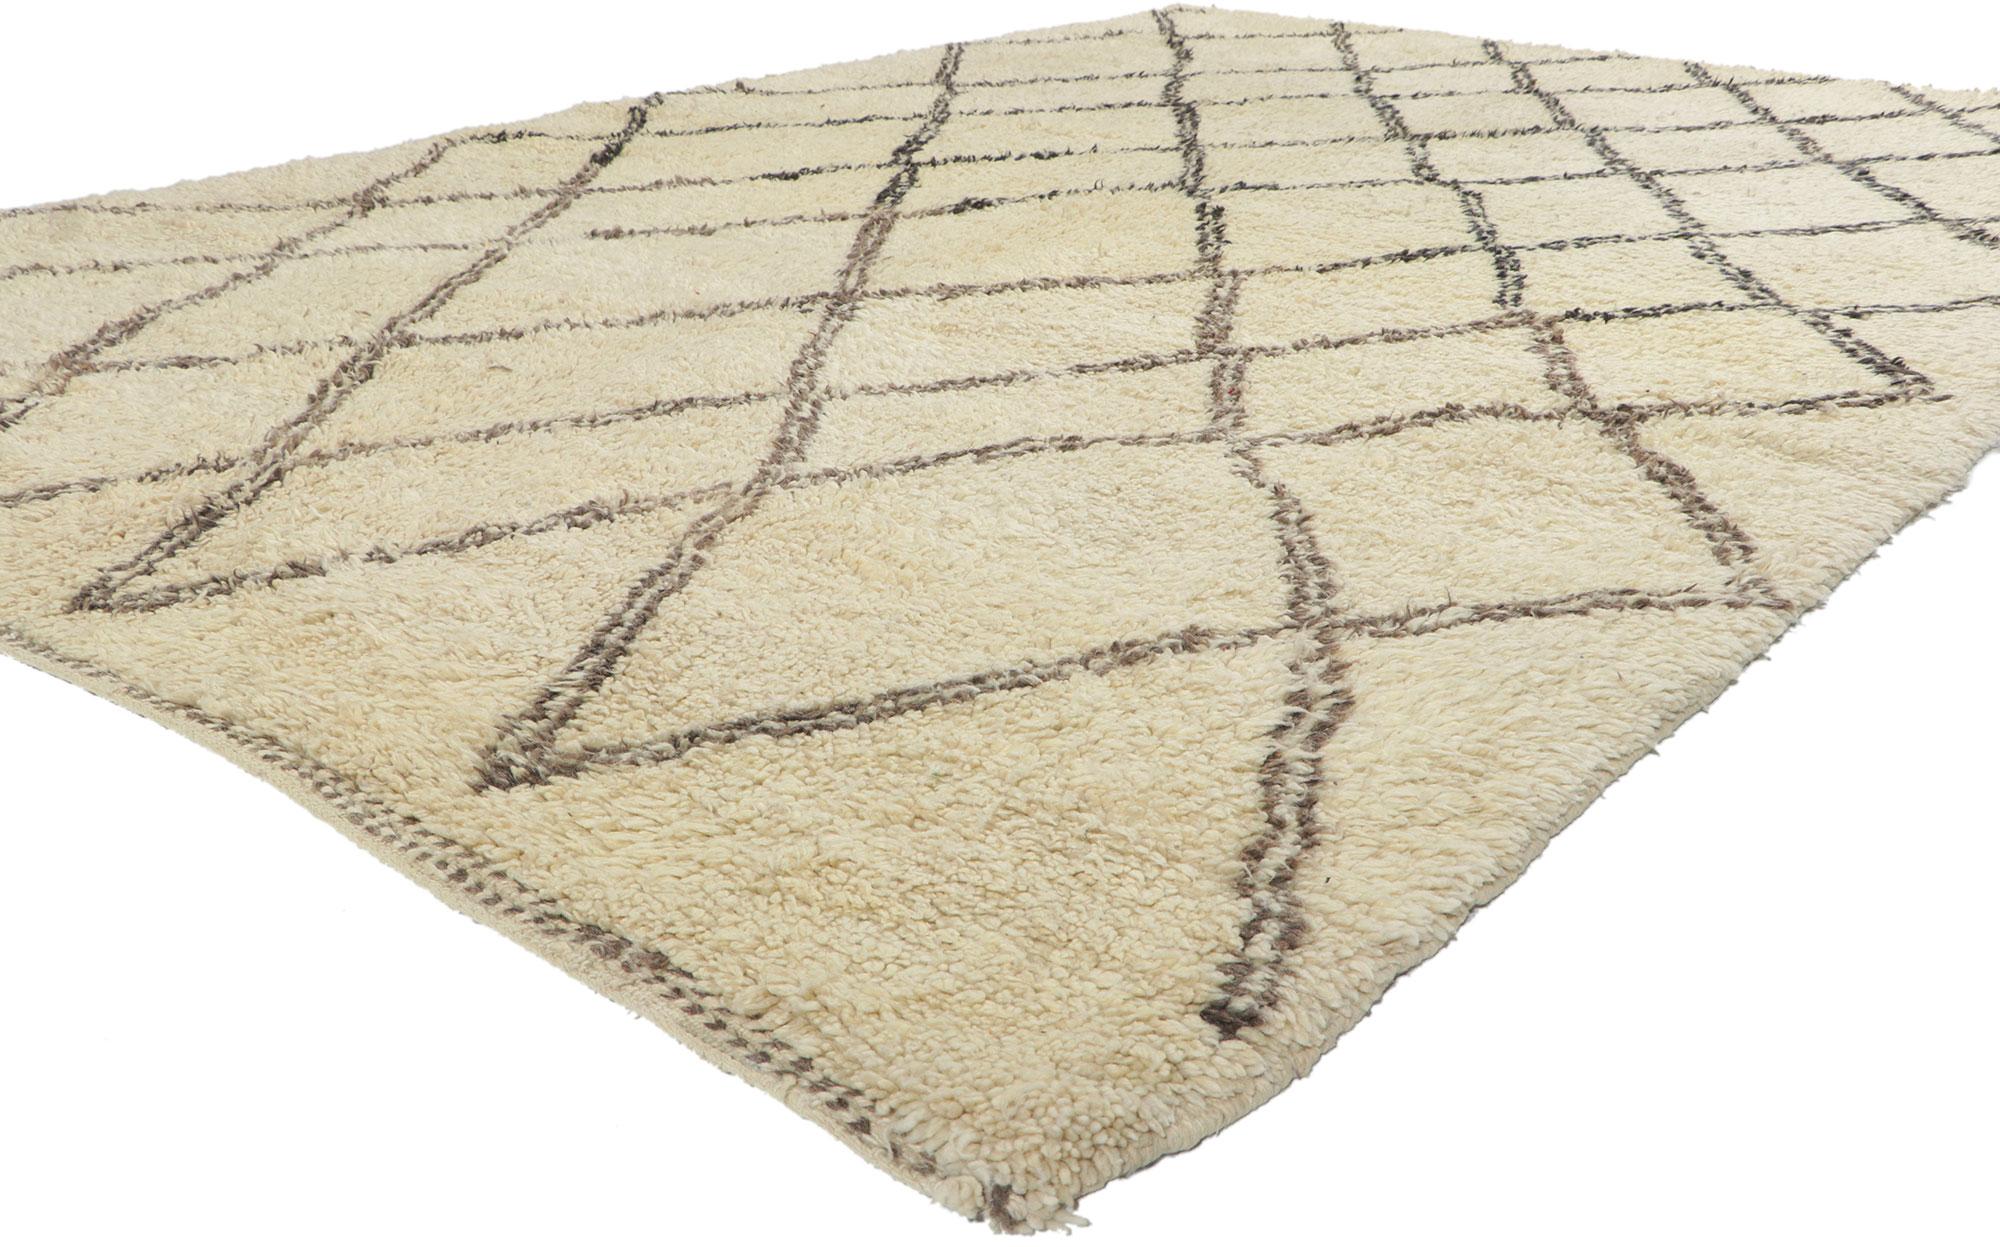 78377 vintage Moroccan Beni Ourain rug, 07'03 x 10'07. With its Midcentury Modern style, incredible detail and texture, this hand knotted wool vintage Beni Ourain Moroccan rug is a captivating vision of woven beauty. The eye-catching diamond trellis